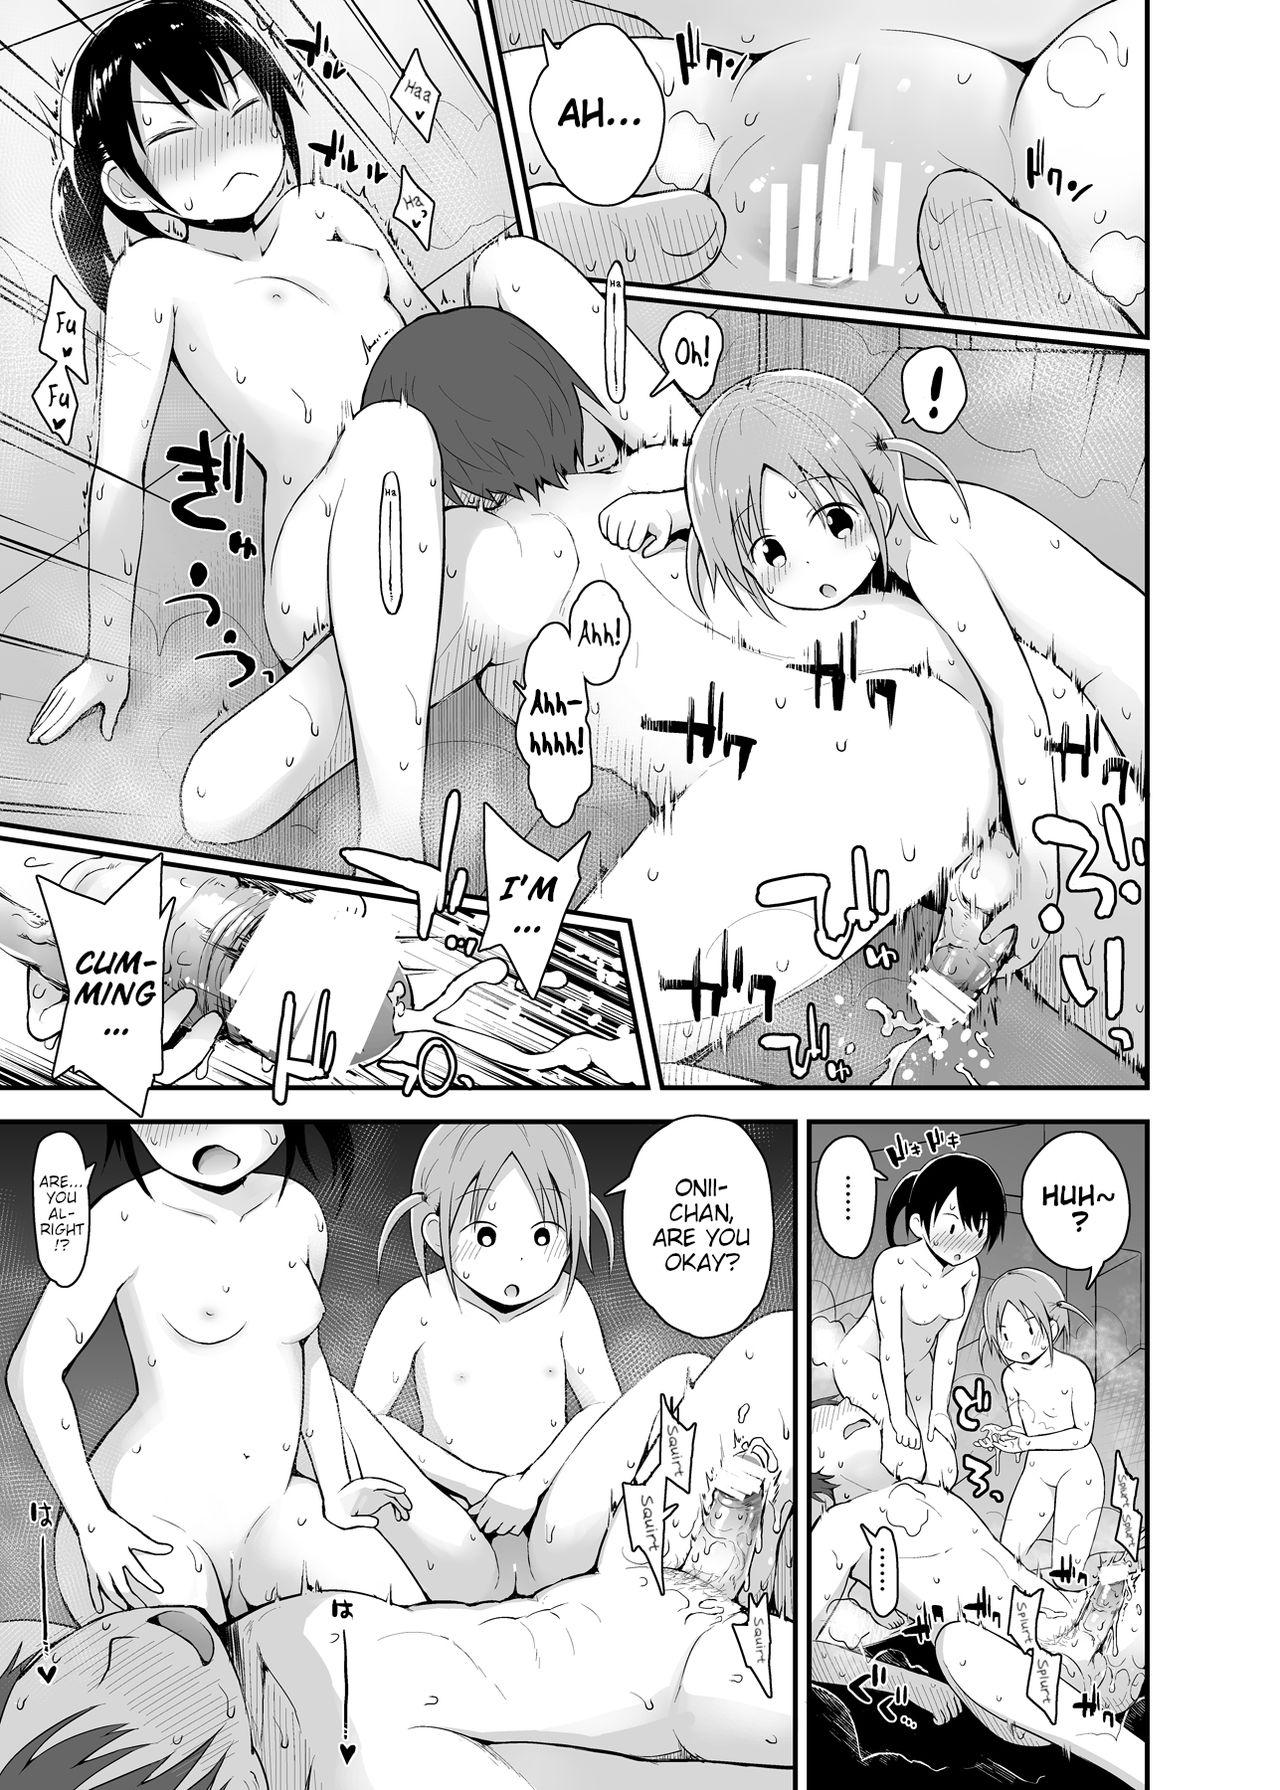 Onnanoko datte Otokoyu ni Hairitai 3 | They may just be little girls, but they still want to enter the men's bath! 3 11